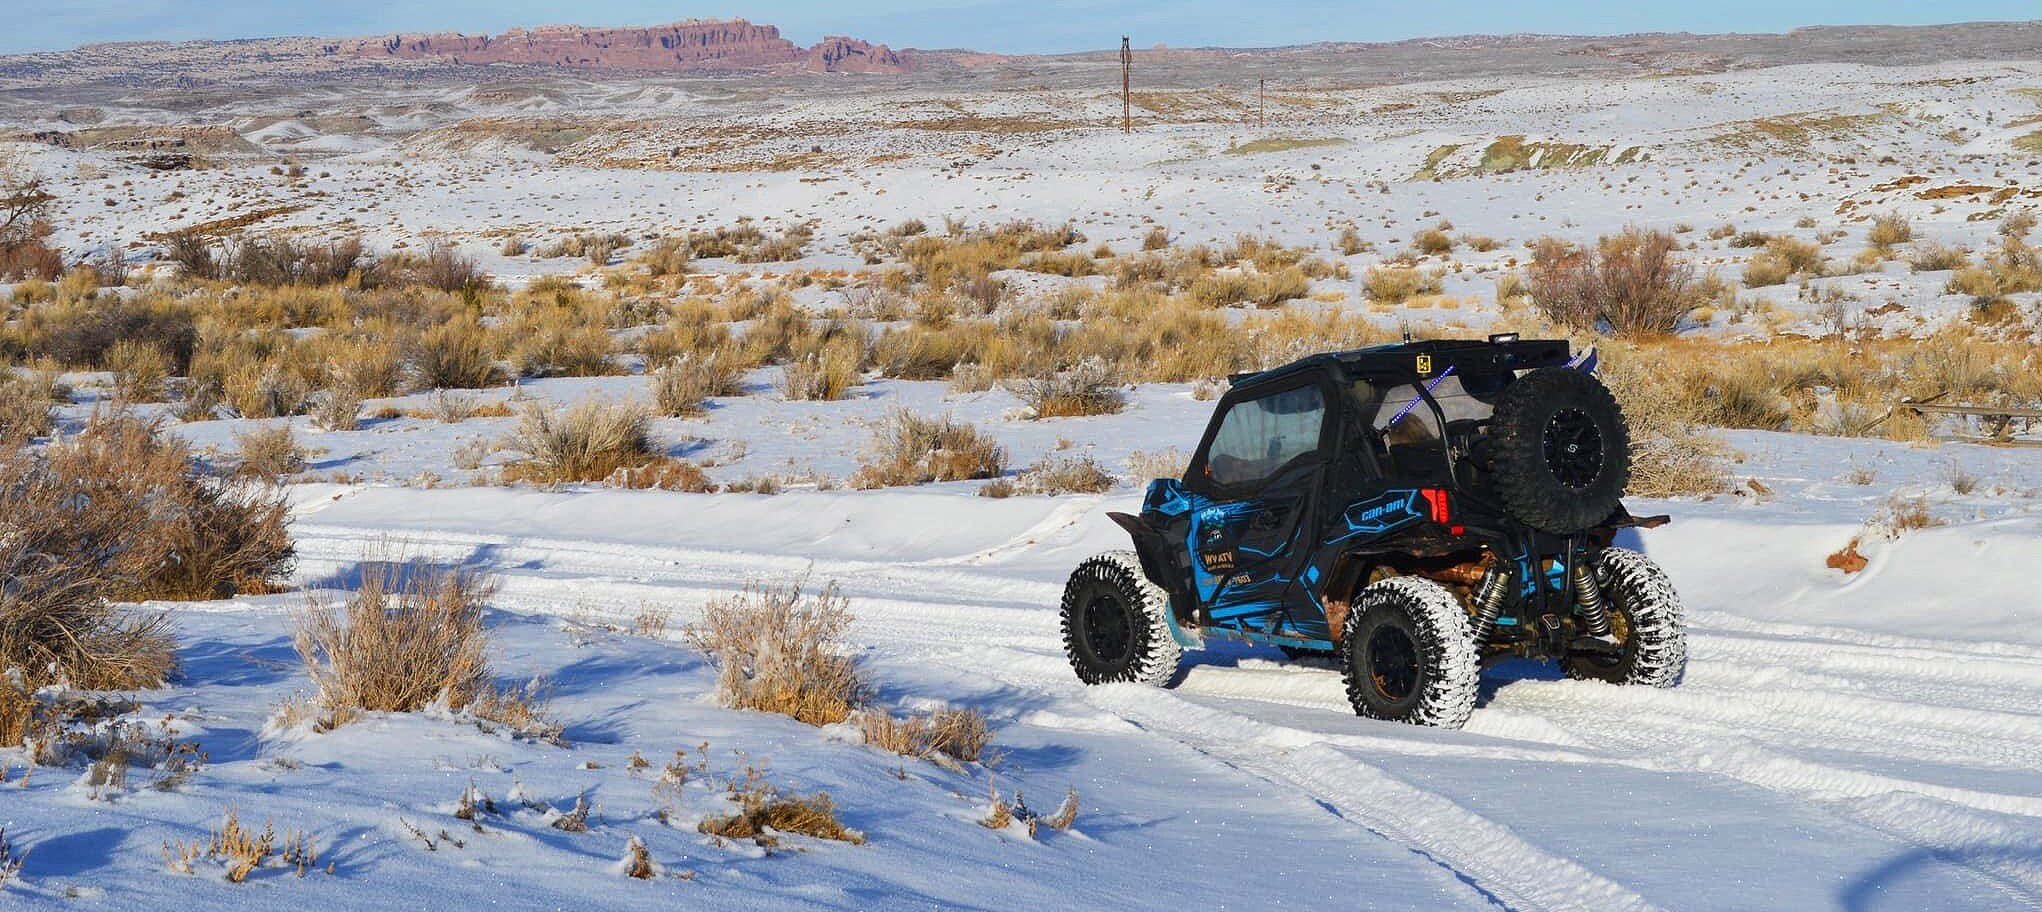 A Can-Am off-road parked with a canyon view